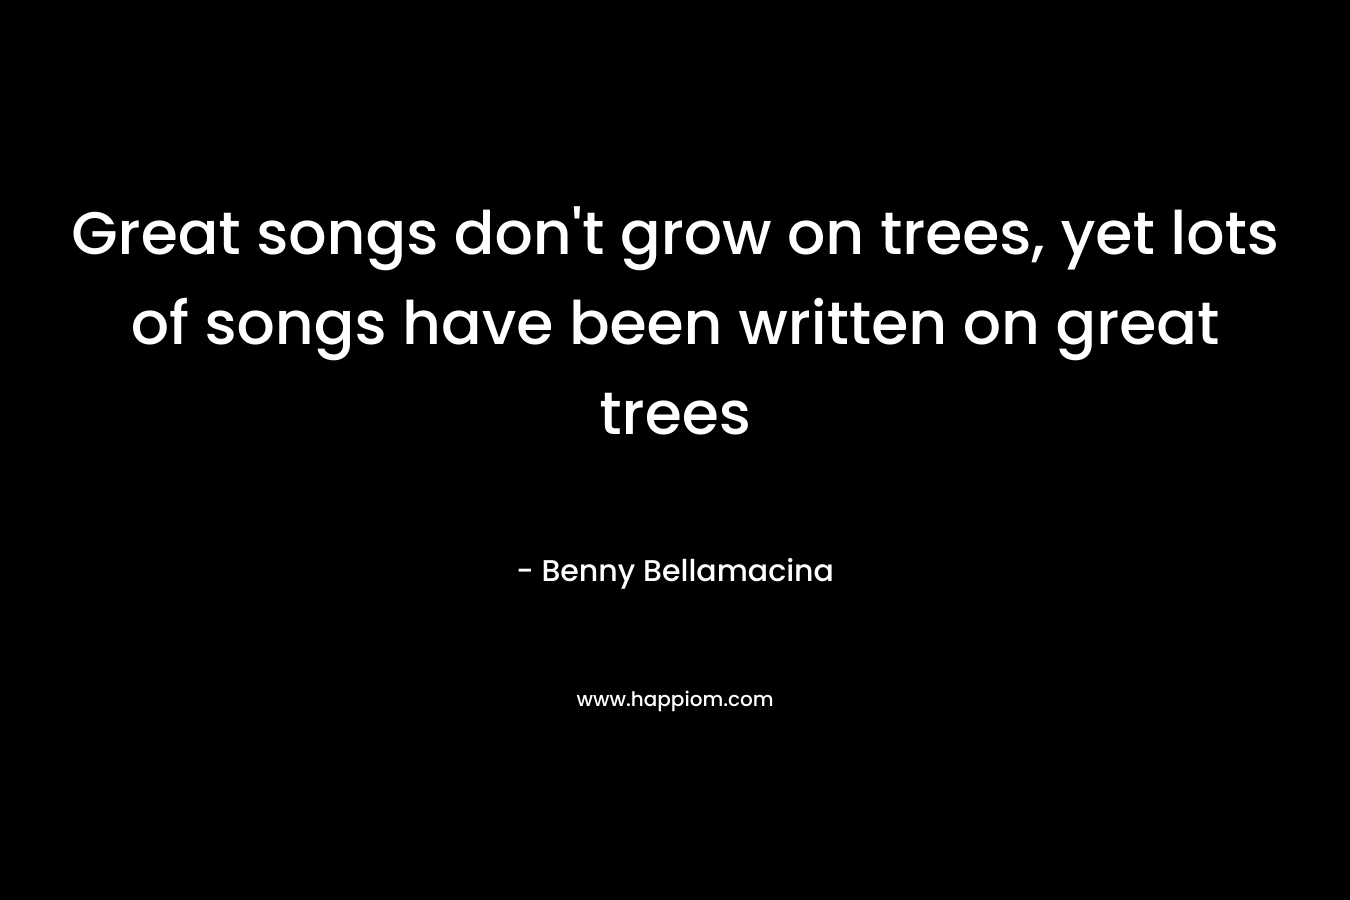 Great songs don't grow on trees, yet lots of songs have been written on great trees